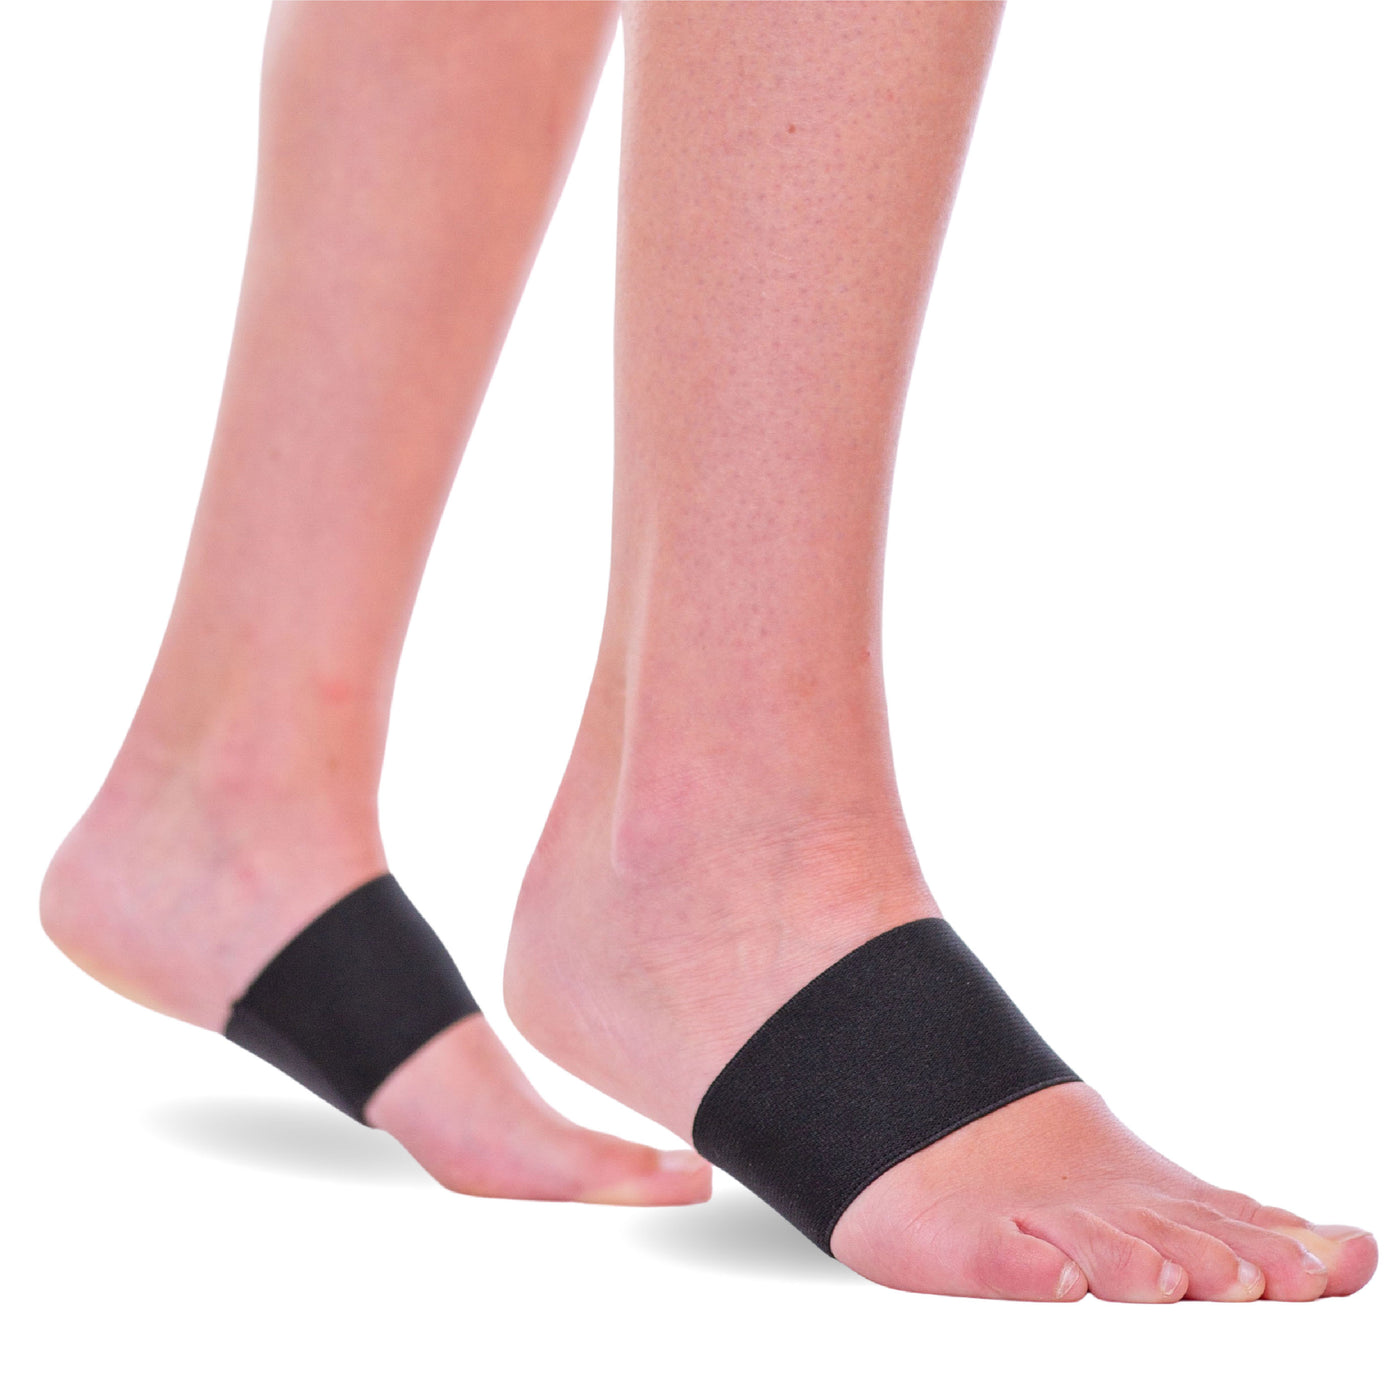 Arch Supports for Plantar Fasciitis Relief | Compression Sleeve Foot Brace  For Heel Pain, Bone Spurs, Flat Feet, High Arches | Copper Infused Arch